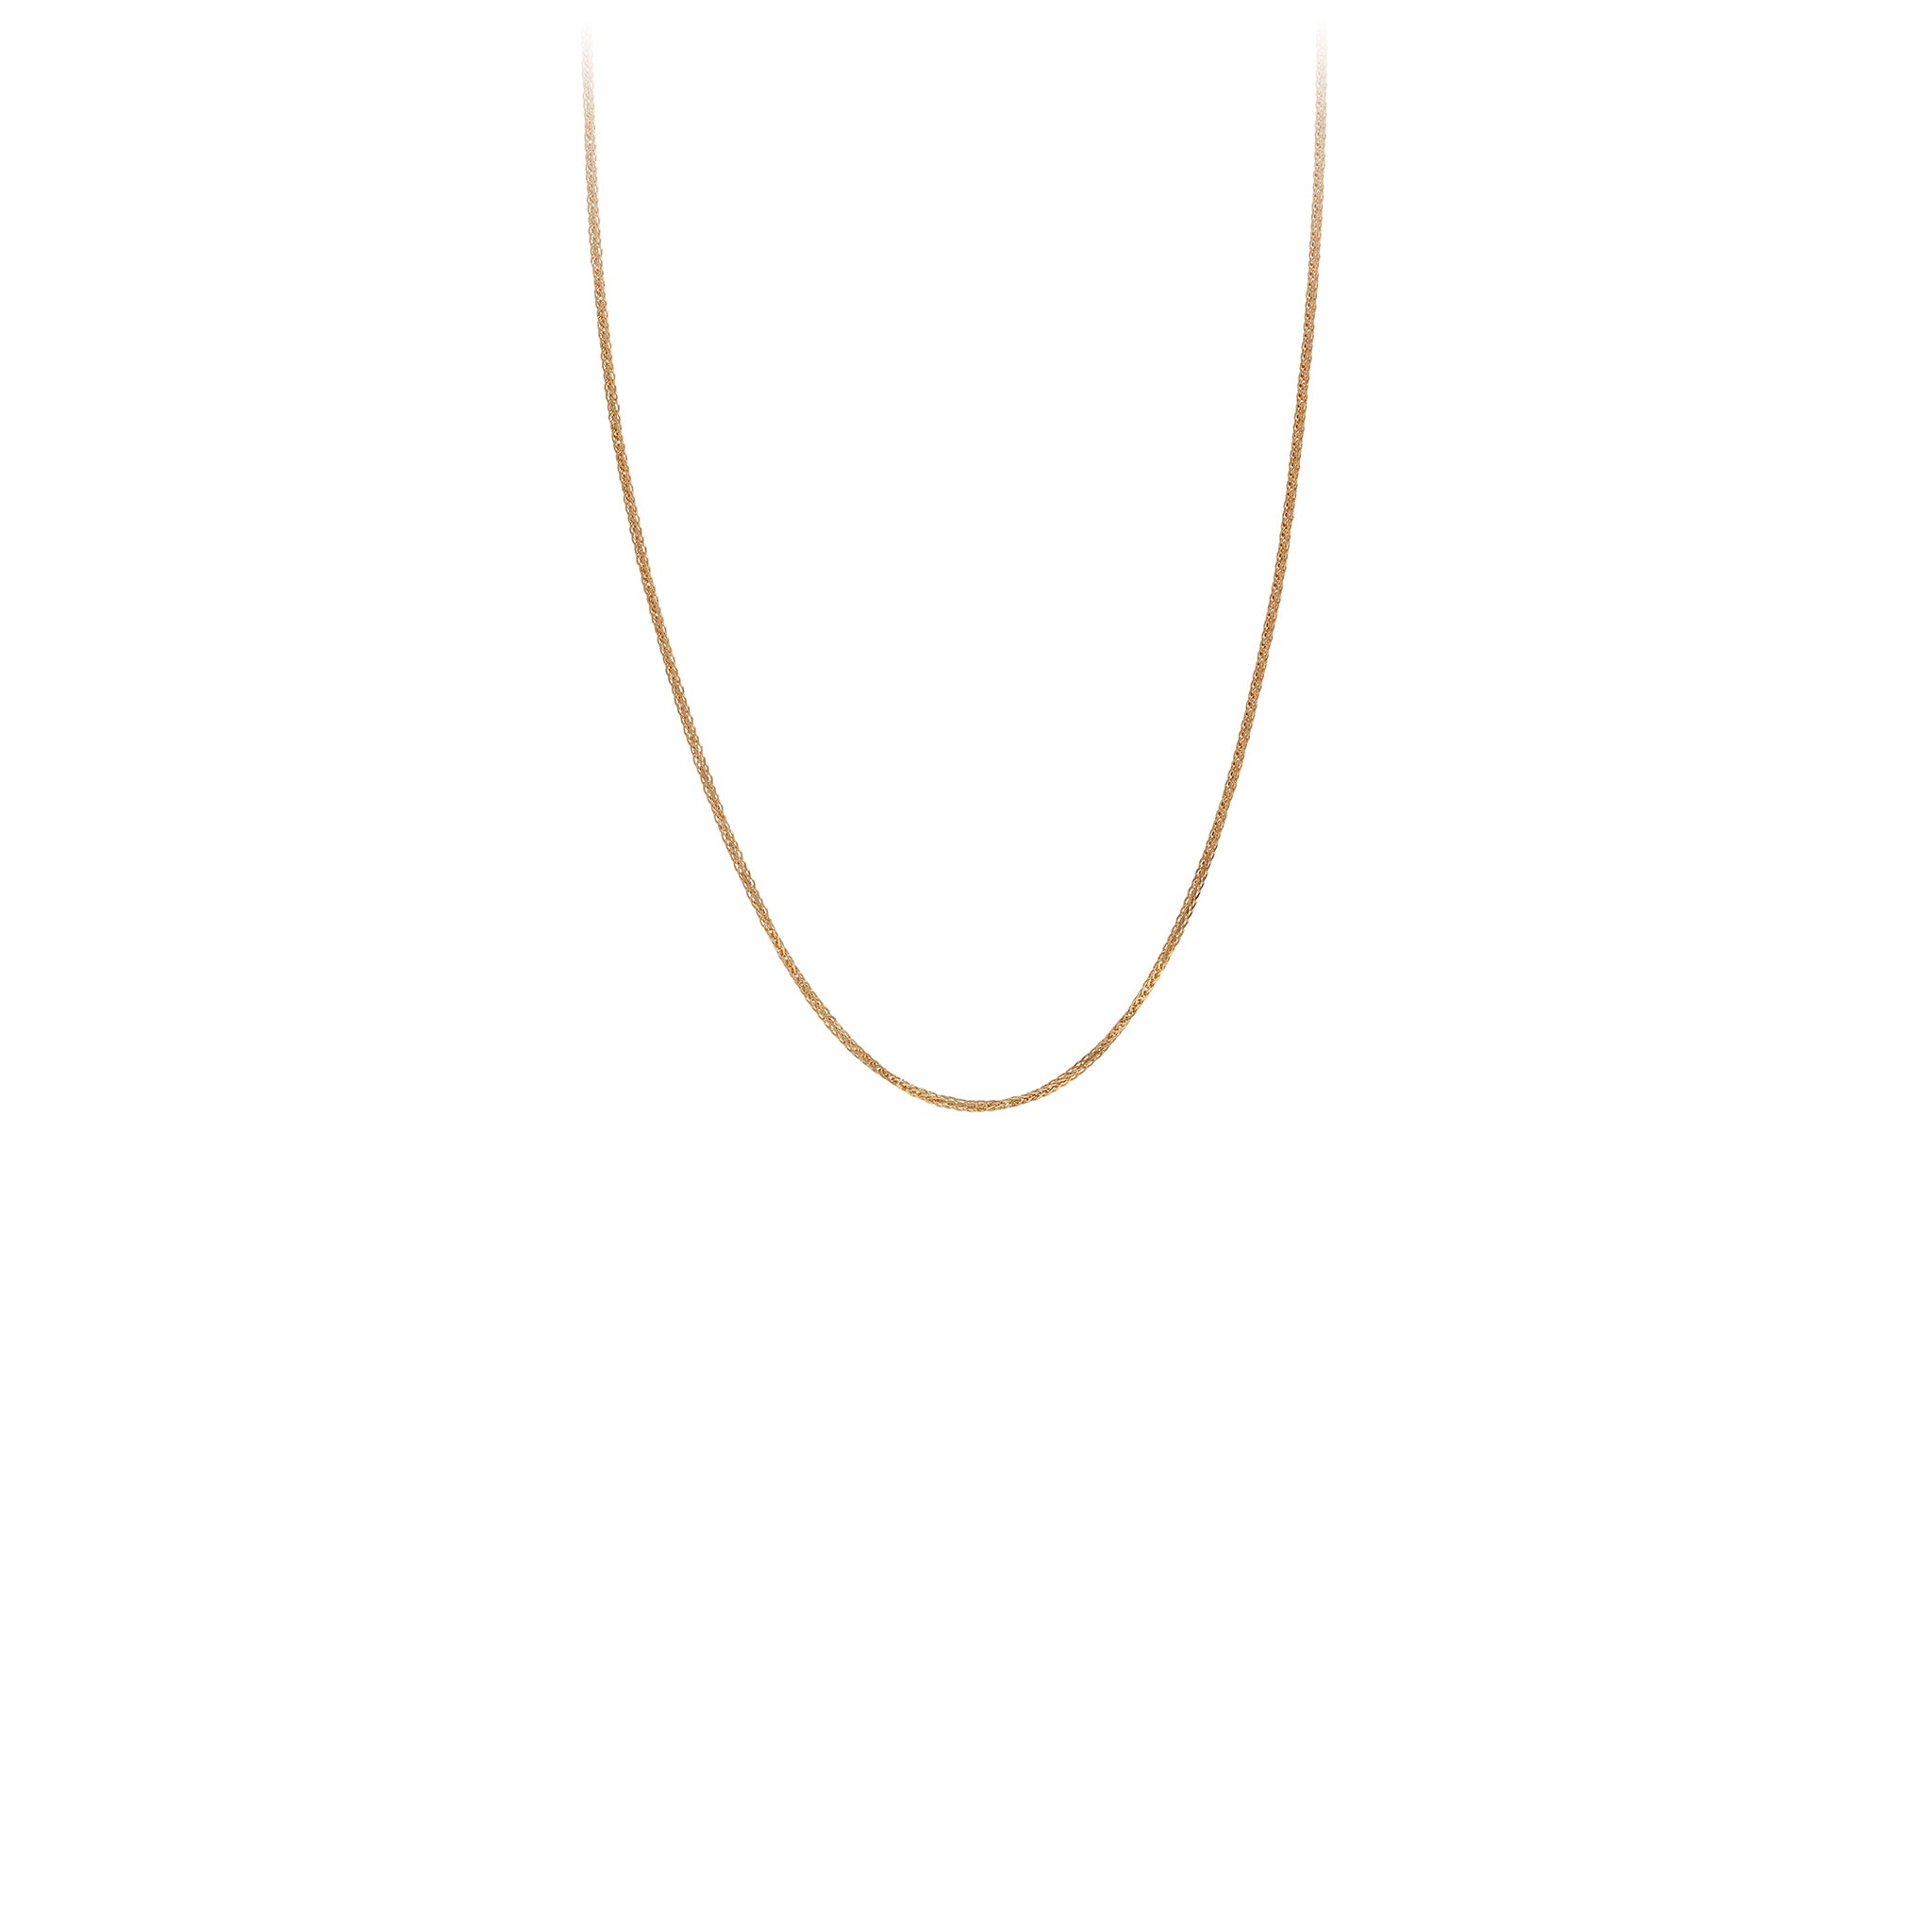 A 14 karat gold chain with diamond cut square wheat links